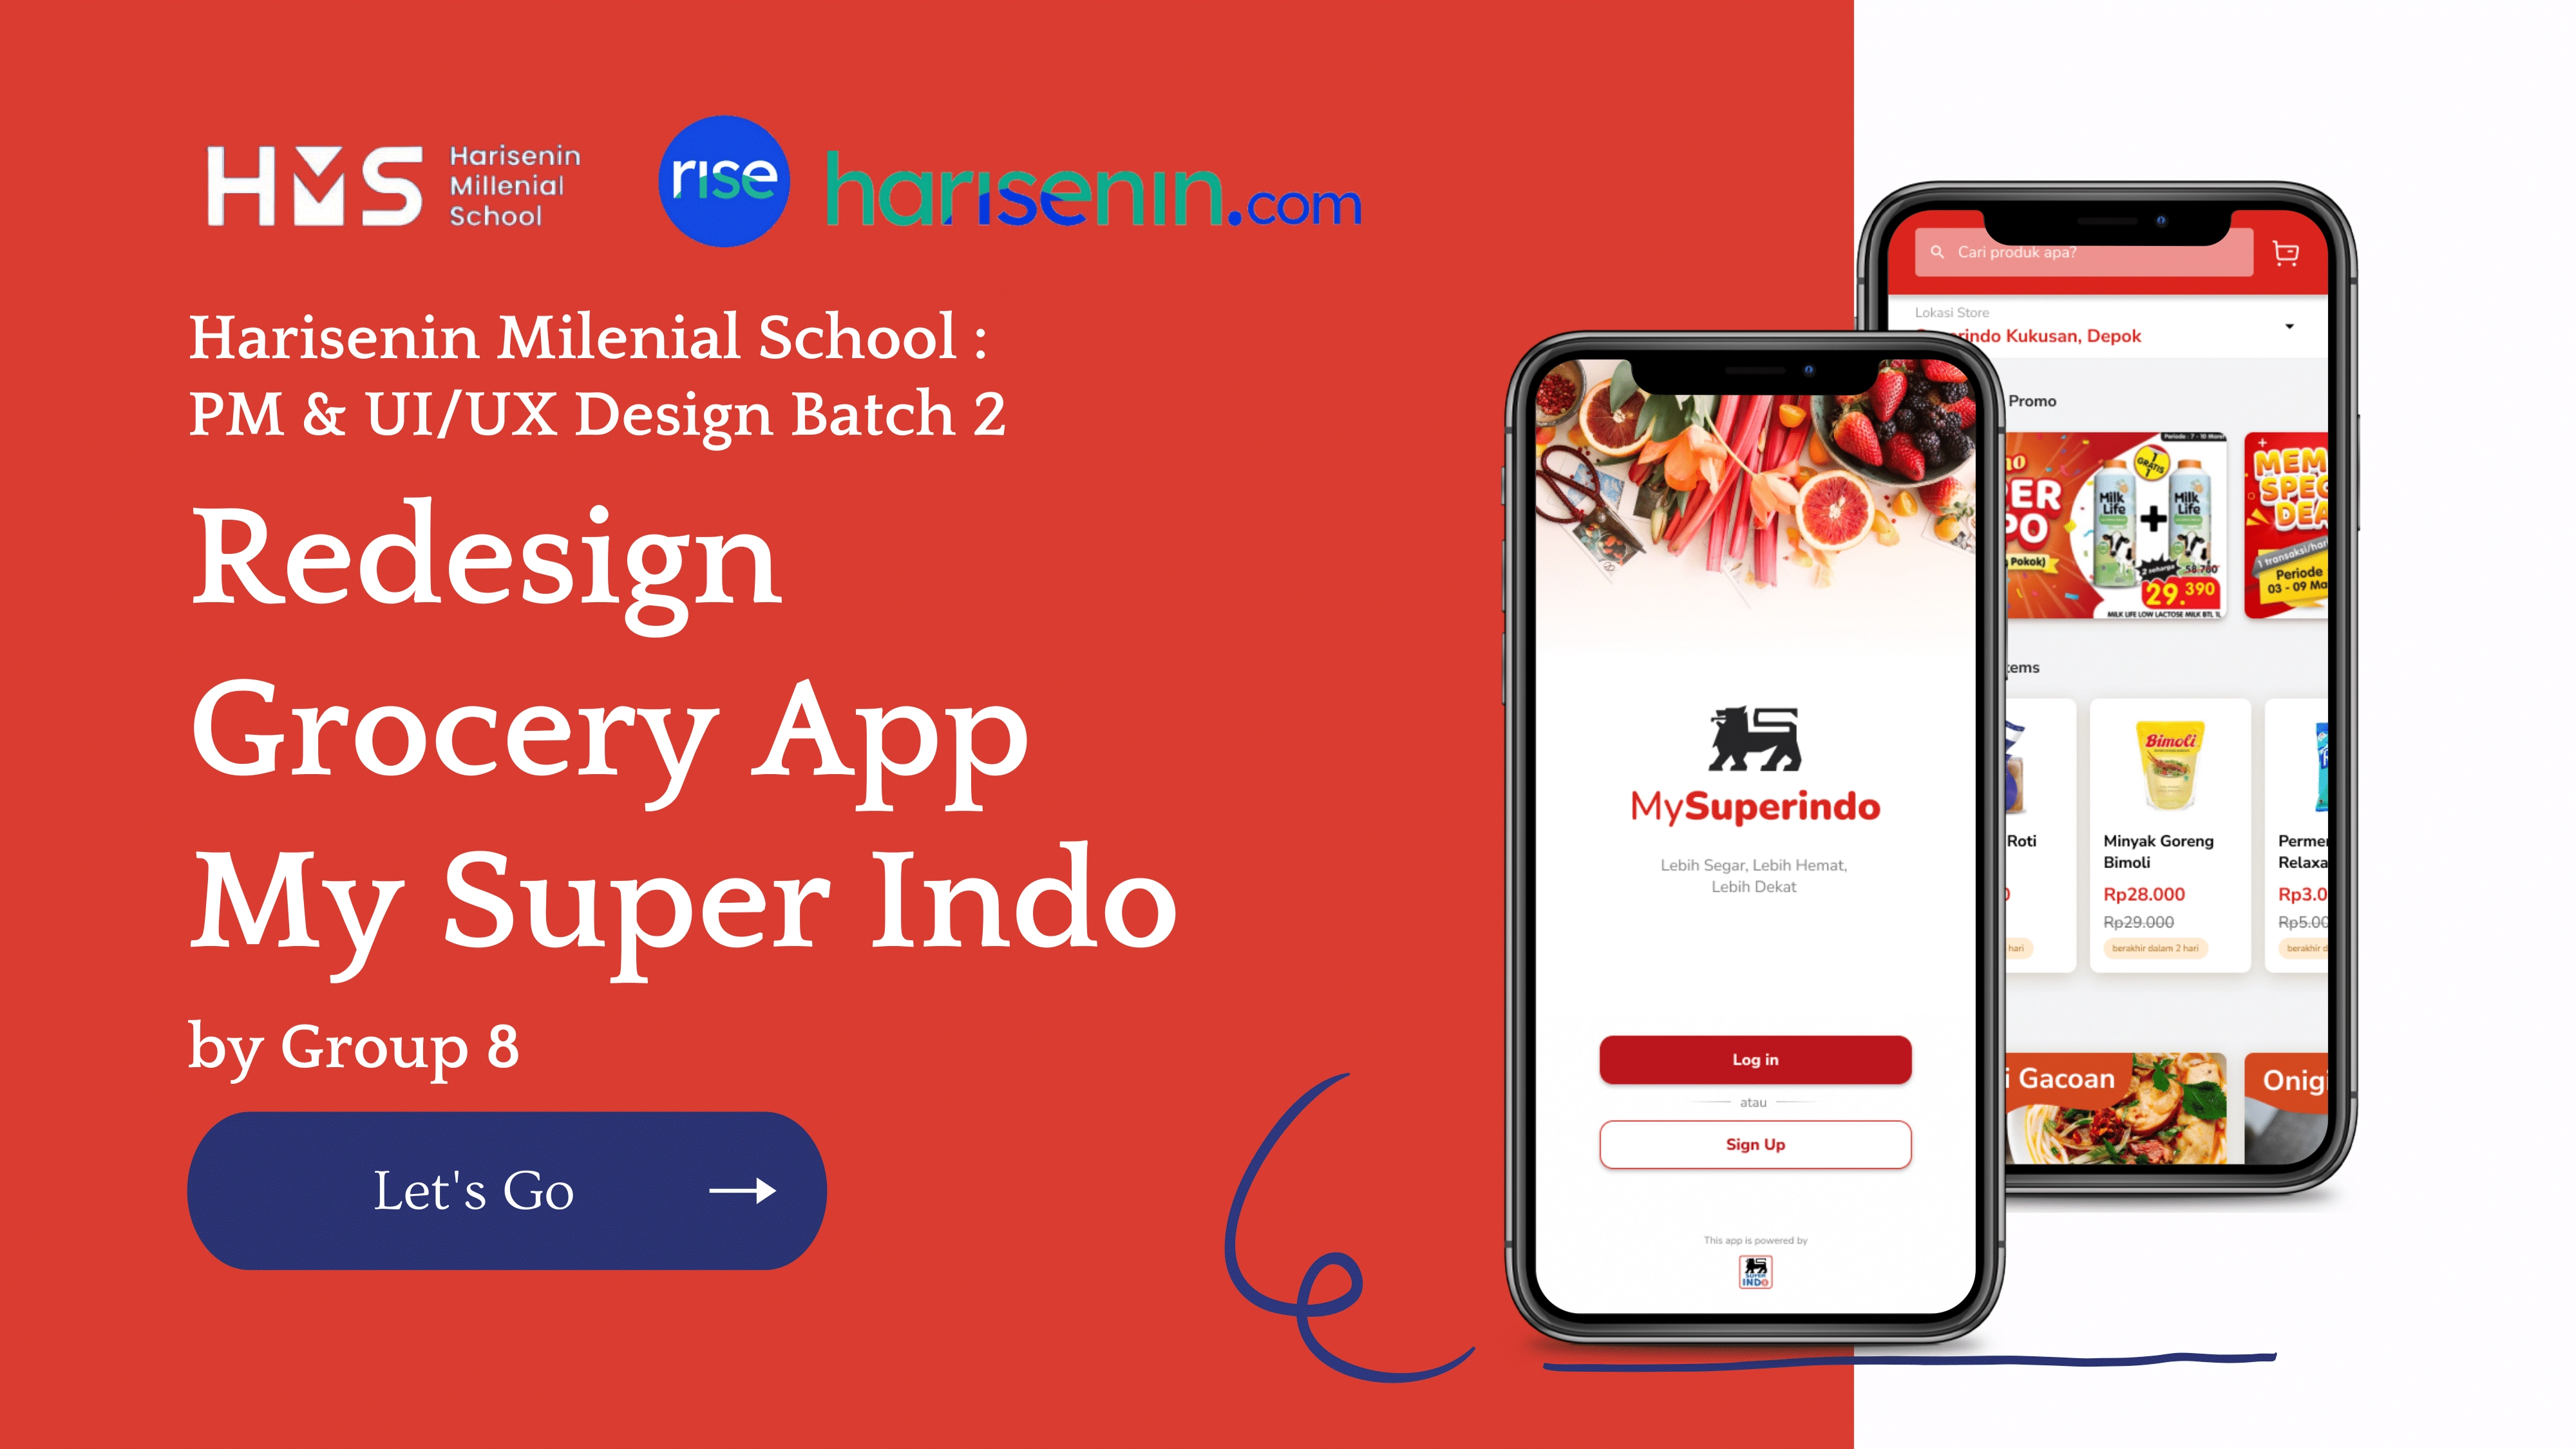 Redesign Grocery App My Super Indo